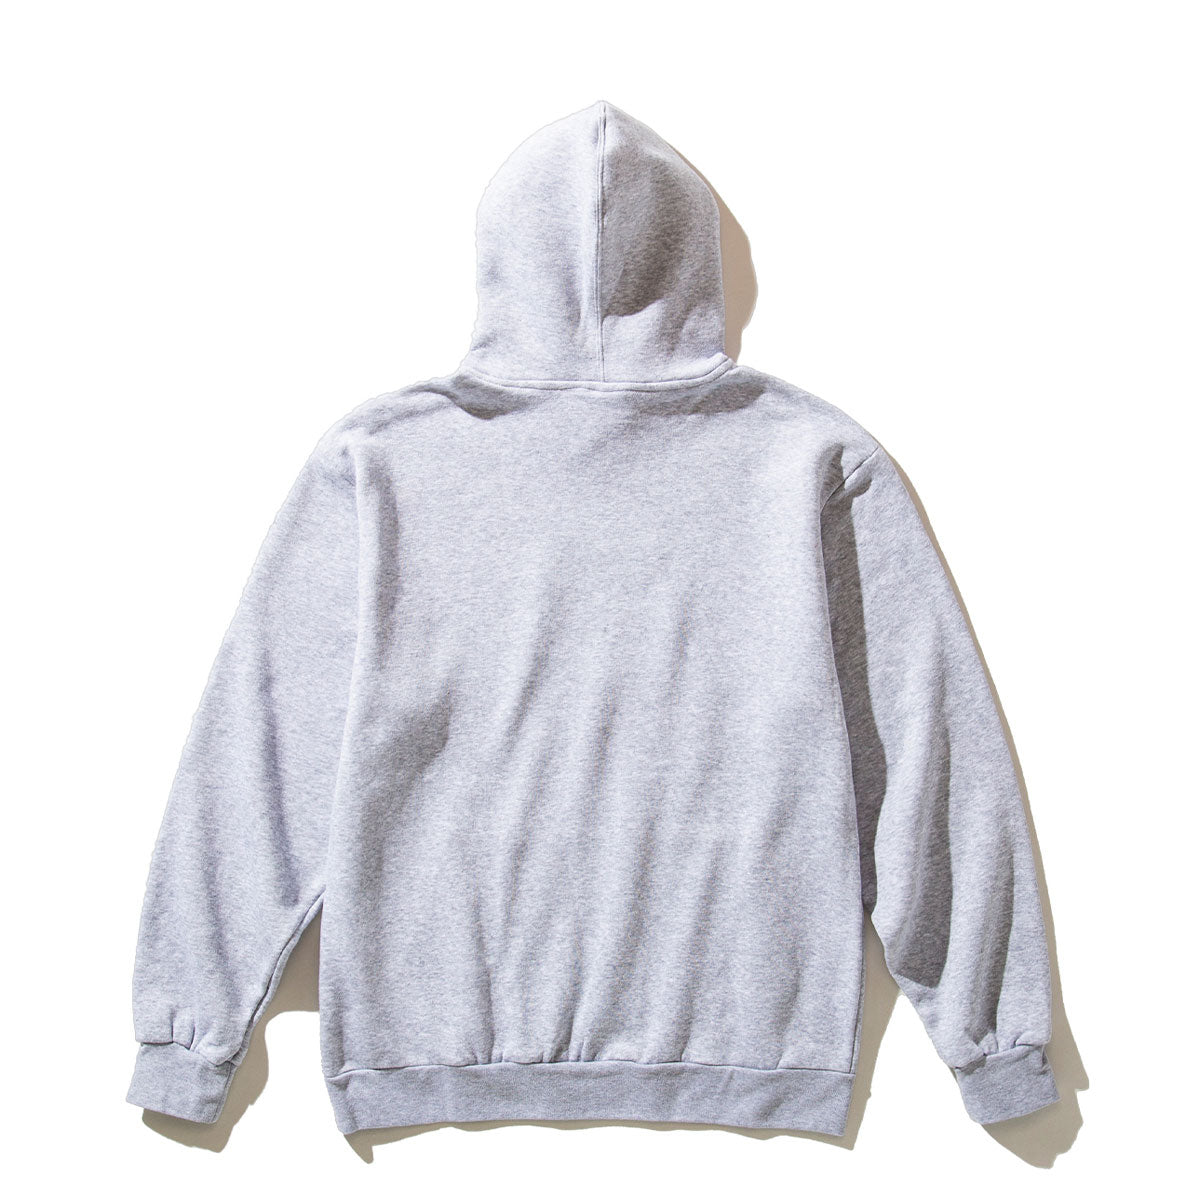 Knit Hooded Pullover - Business As Usual